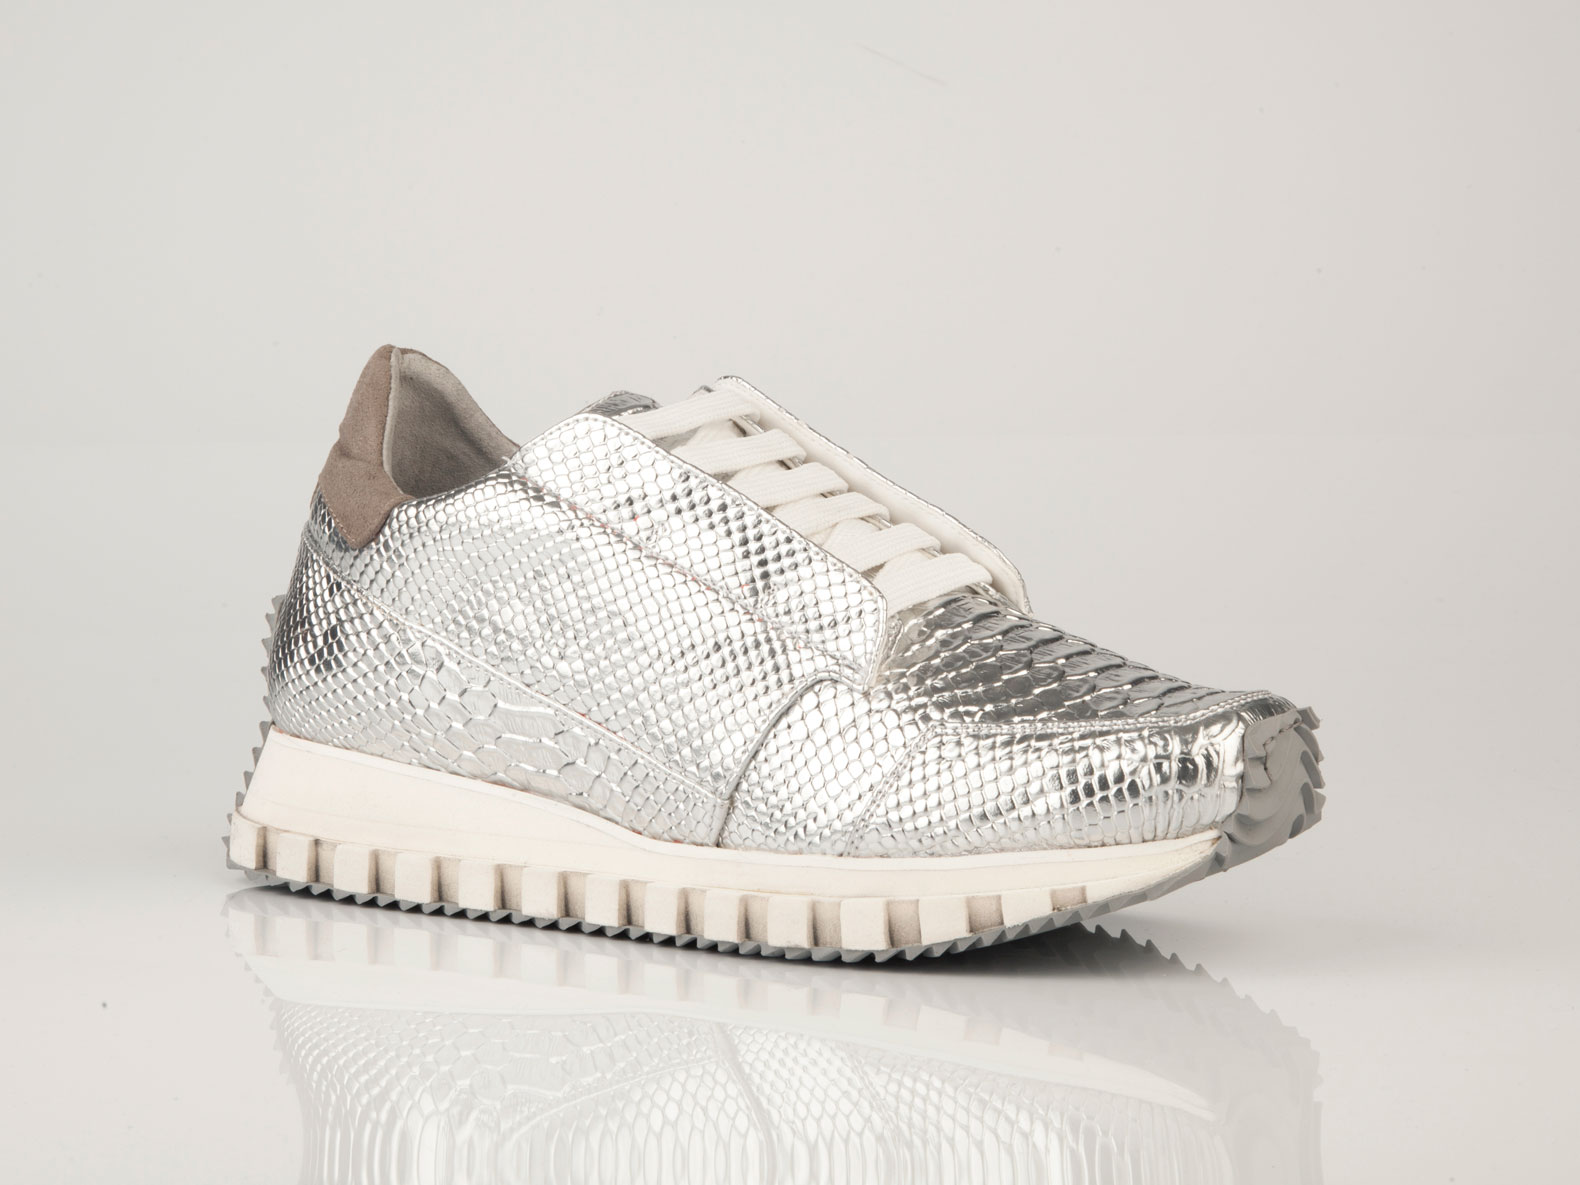 Vegan leather inspires new sneaker collection | Design Indaba